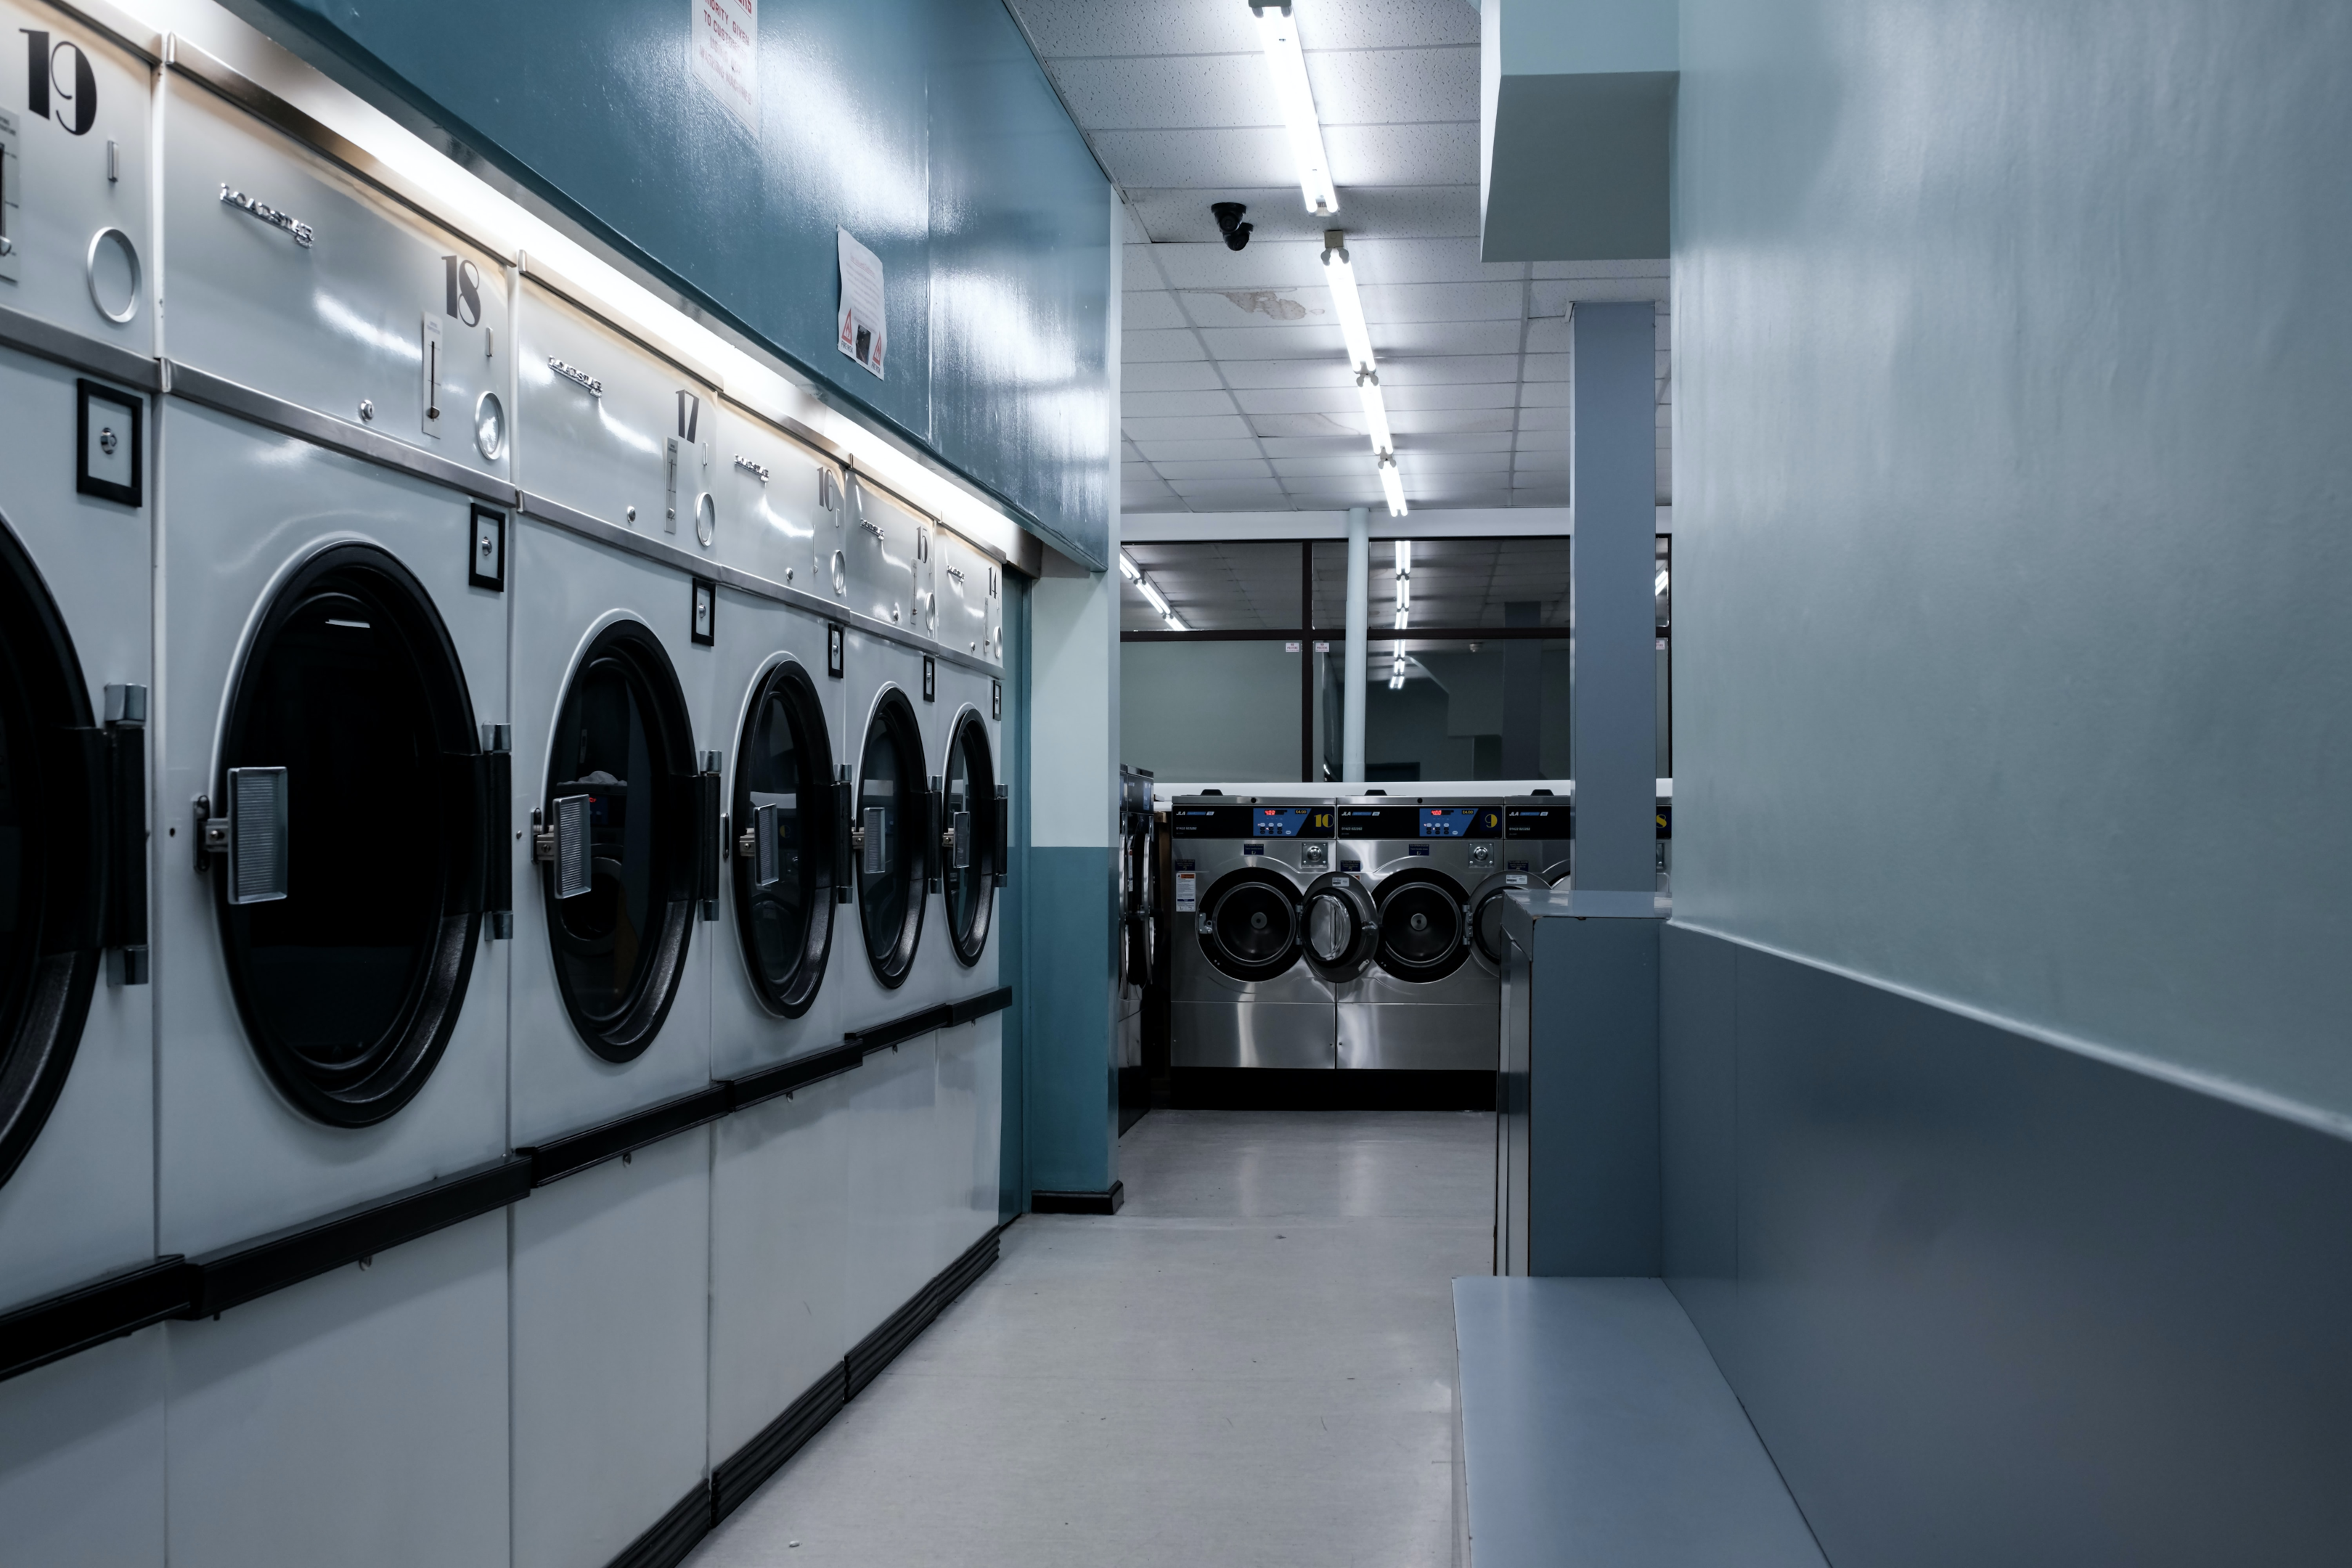 A local laundromat with multiple washers and dryers offering nearby apartment dwellers laundry services